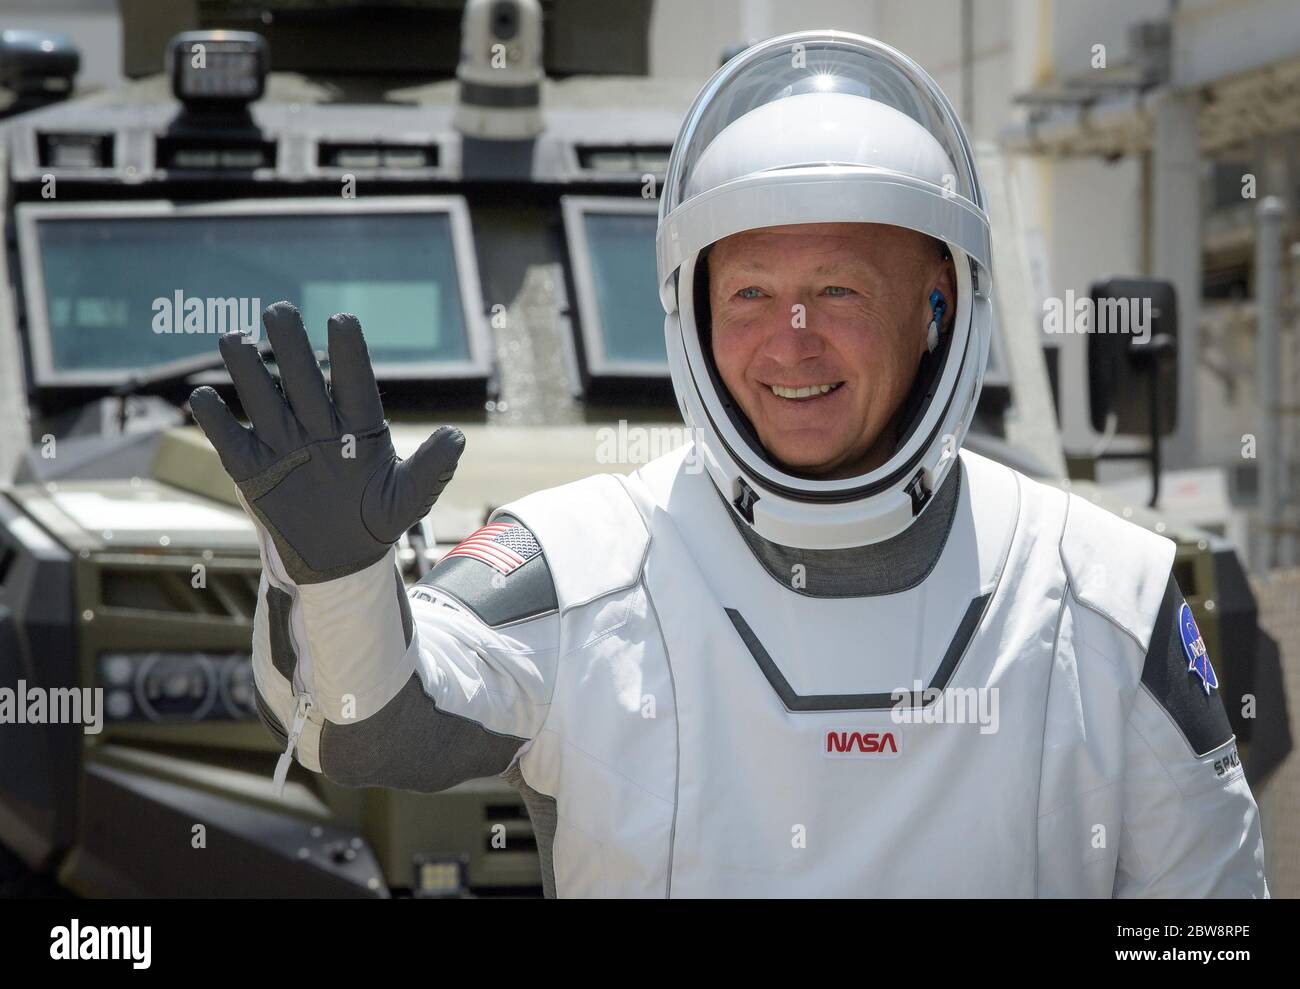 (200530) -- CAPE CANAVERAL (U.S.), May 30, 2020 (Xinhua) -- NASA astronaut Doug Hurley waves as he and Bob Behnken depart for Launch Complex 39A at NASA's Kennedy Space Center in Florida, the United States, May 30, 2020. NASA and SpaceX launched Crew Dragon spacecraft from NASA's Kennedy Space Center in Florida on Saturday, carrying two American astronauts to the International Space Station (ISS). (Bill Ingalls/NASA/Handout via Xinhua) Stock Photo